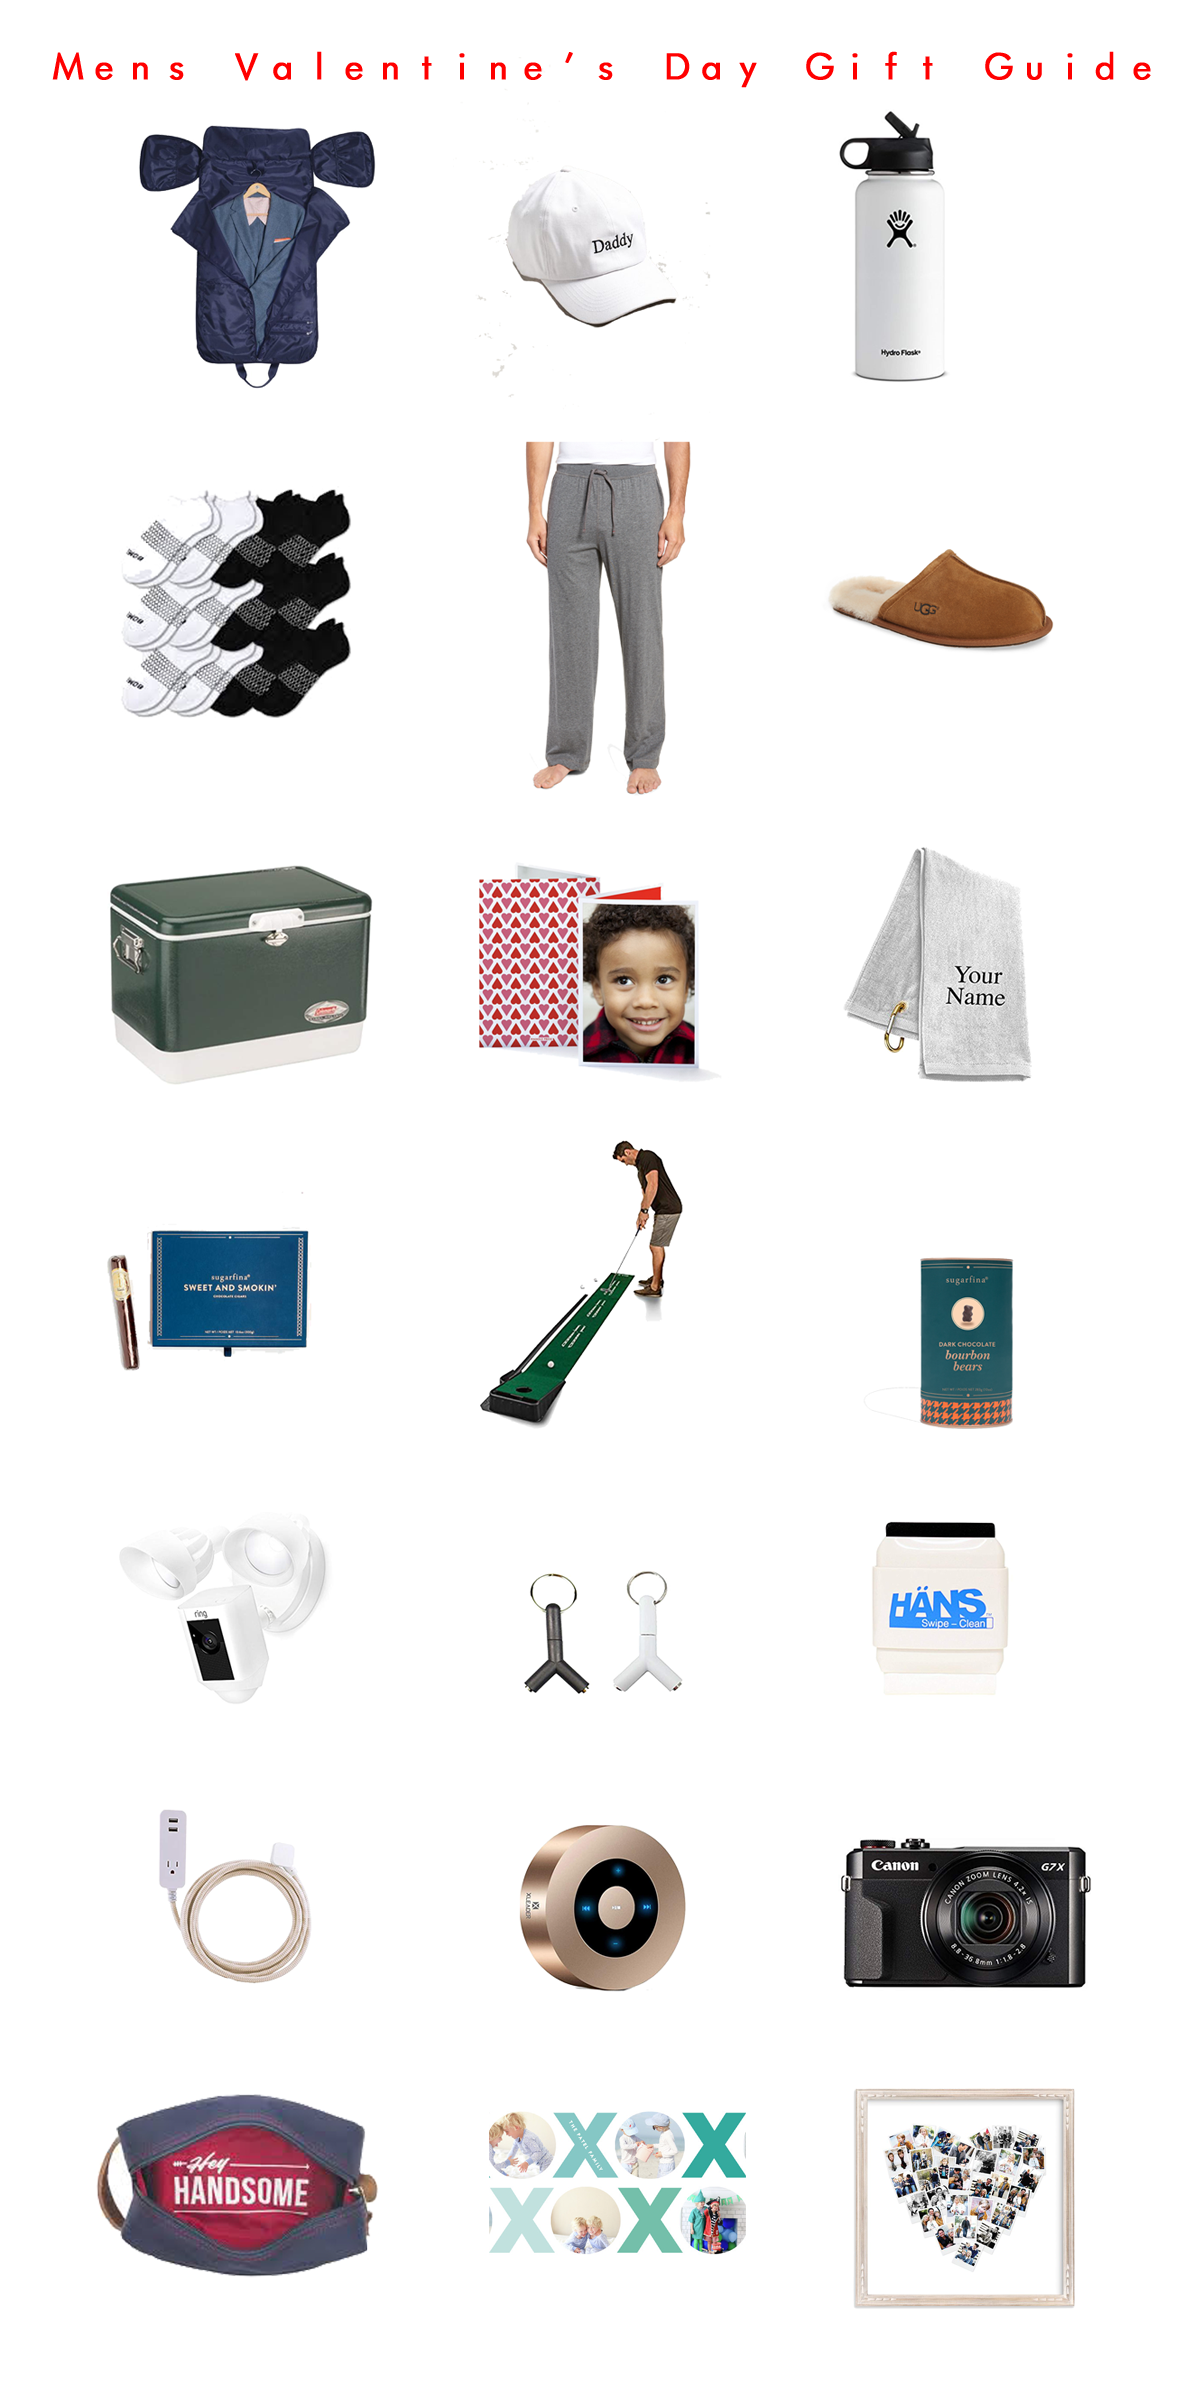 https://sarah-tucker.com/wp-content/uploads/2019/01/mens-valentines-day-gift-guide.png